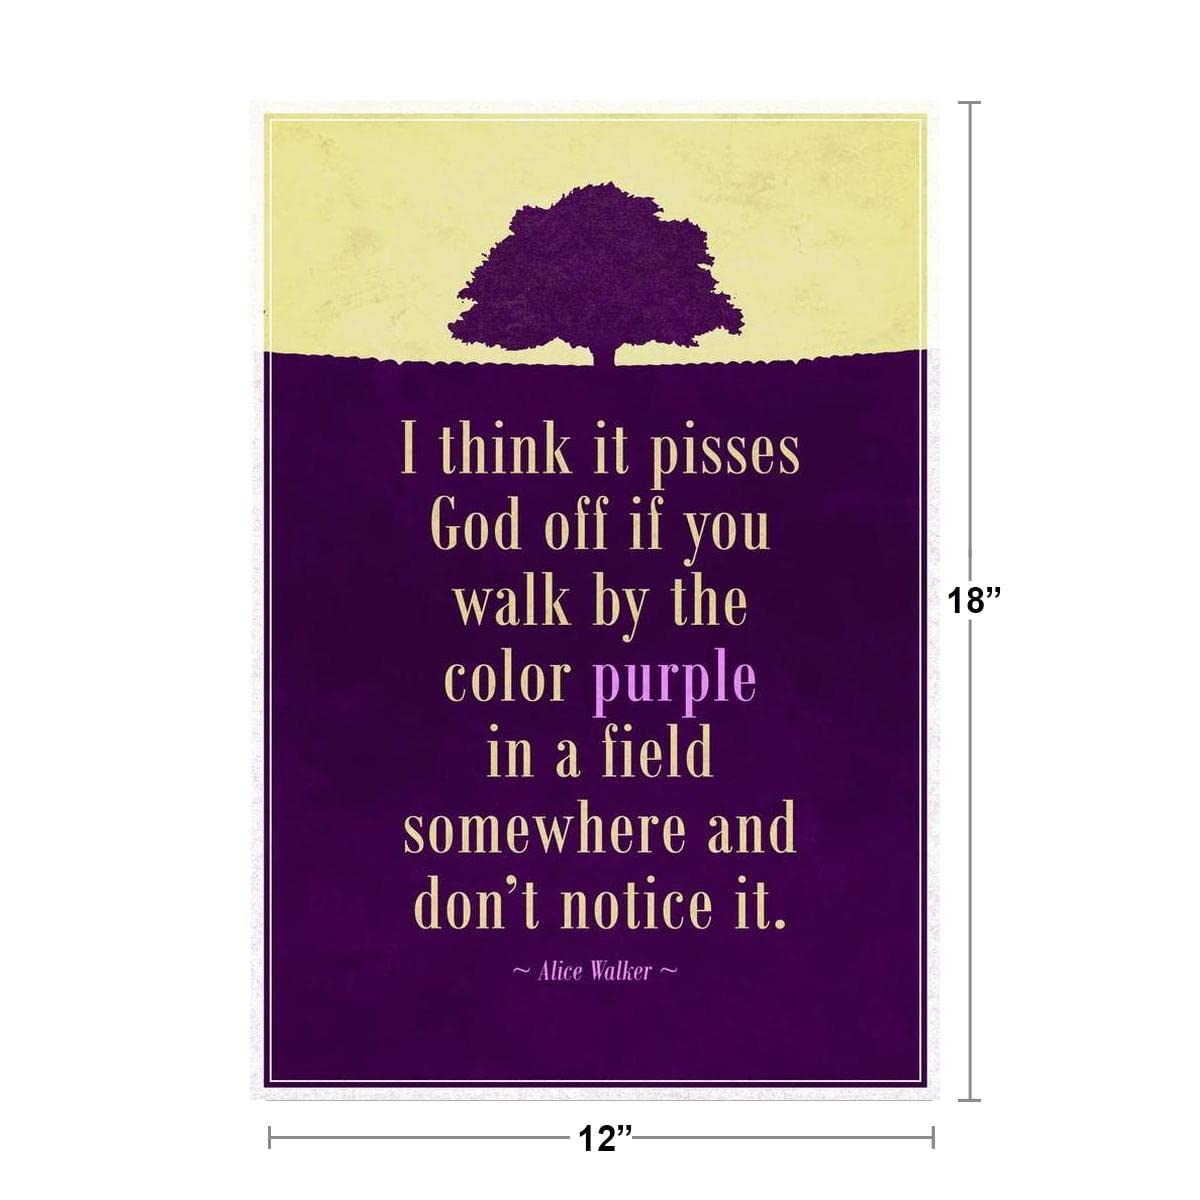 Alice Walker The Color Purple Quotation Cool Wall Decor Art Print Poster 12x18